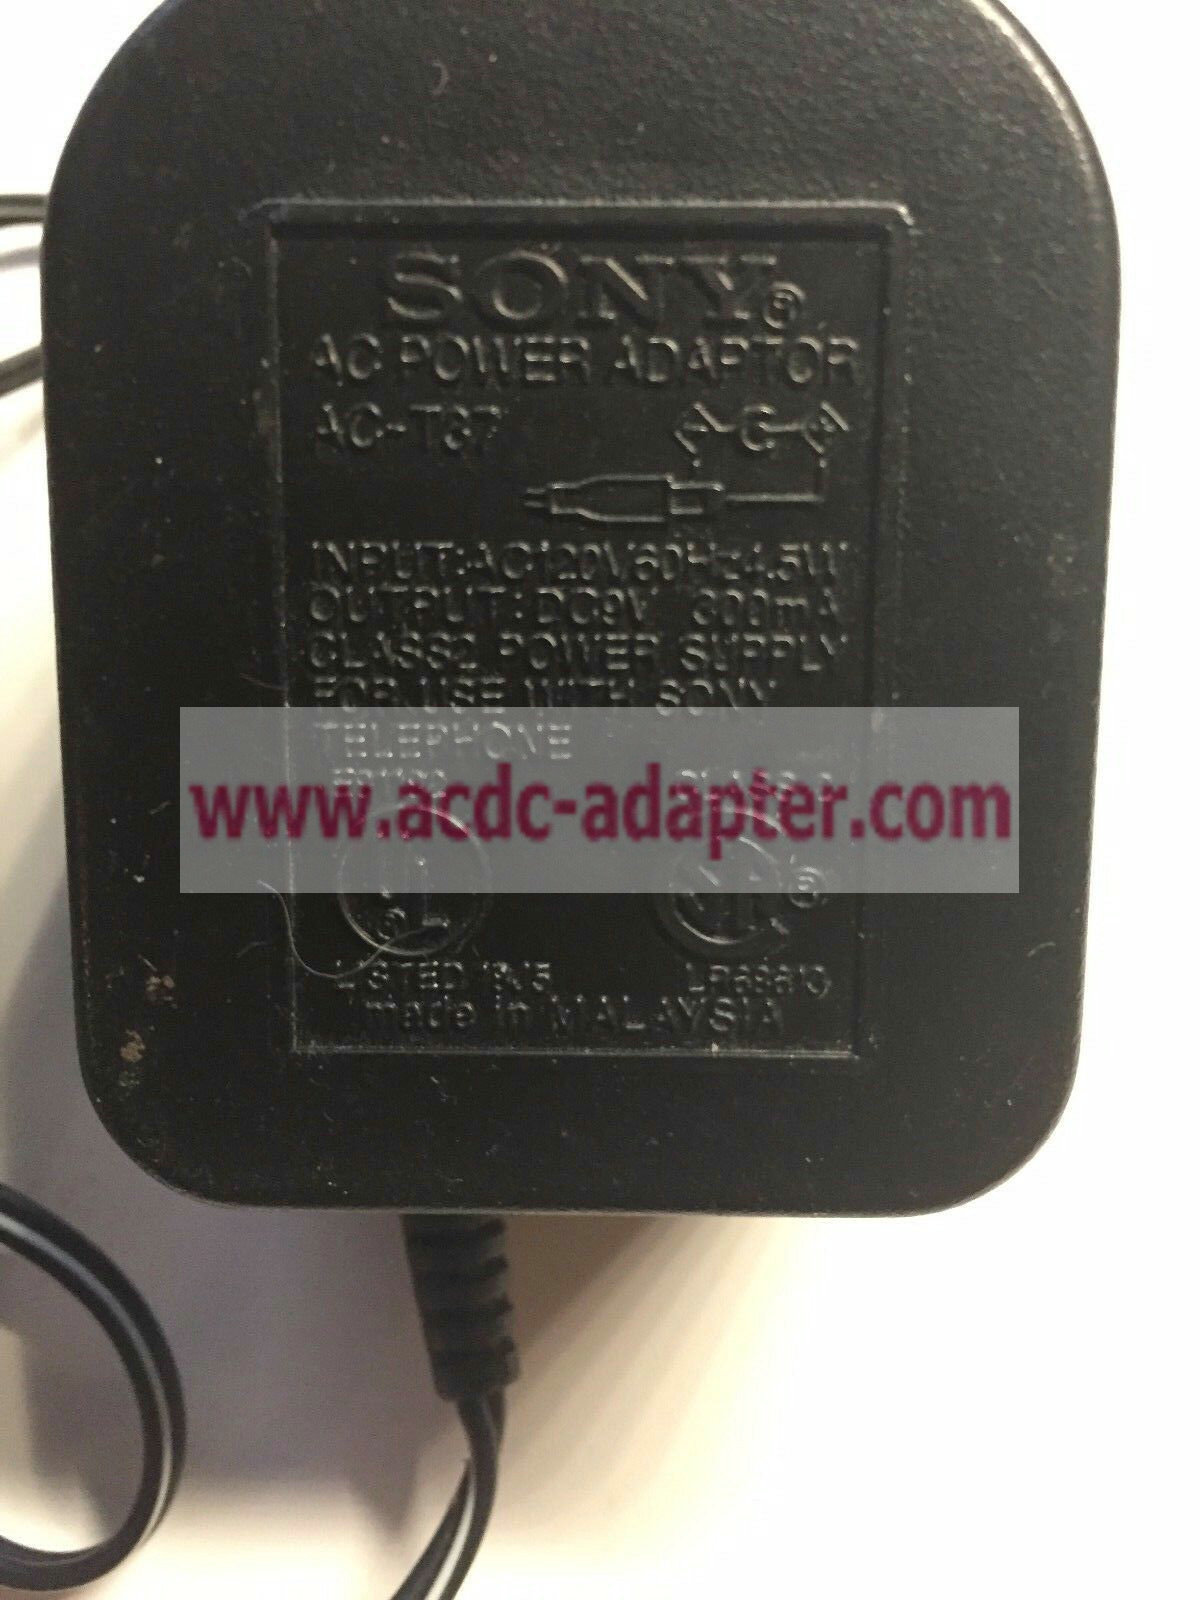 New Sony AC-T37 9V DC 300mA AC Adapter for Sony Telephone - Click Image to Close